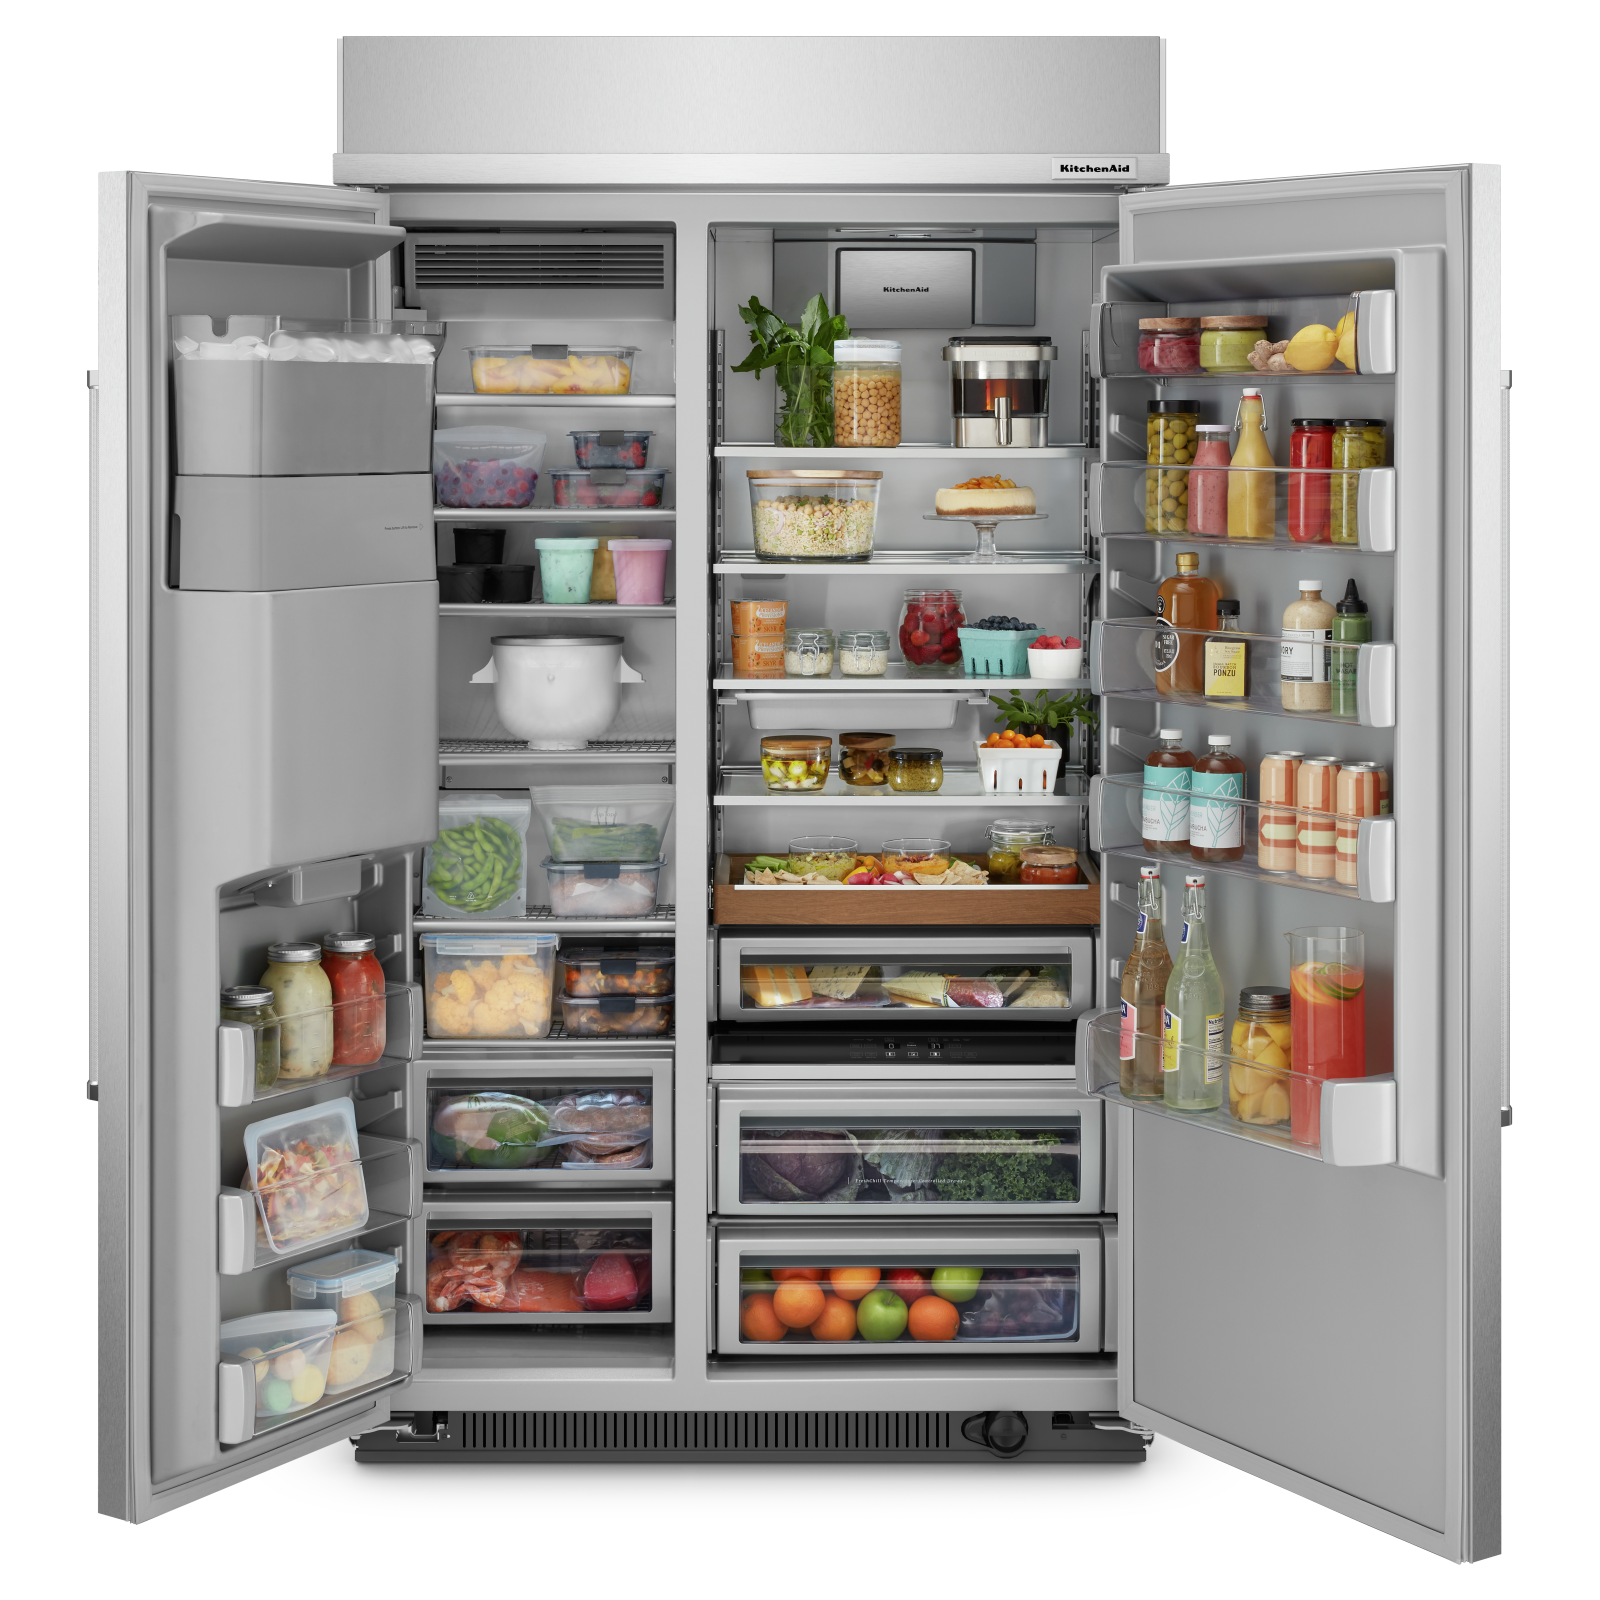 KitchenAid - 47.25 Inch 29.4 cu. ft Built In / Integrated Side by Side Refrigerator in Stainless - KBSD708MPS